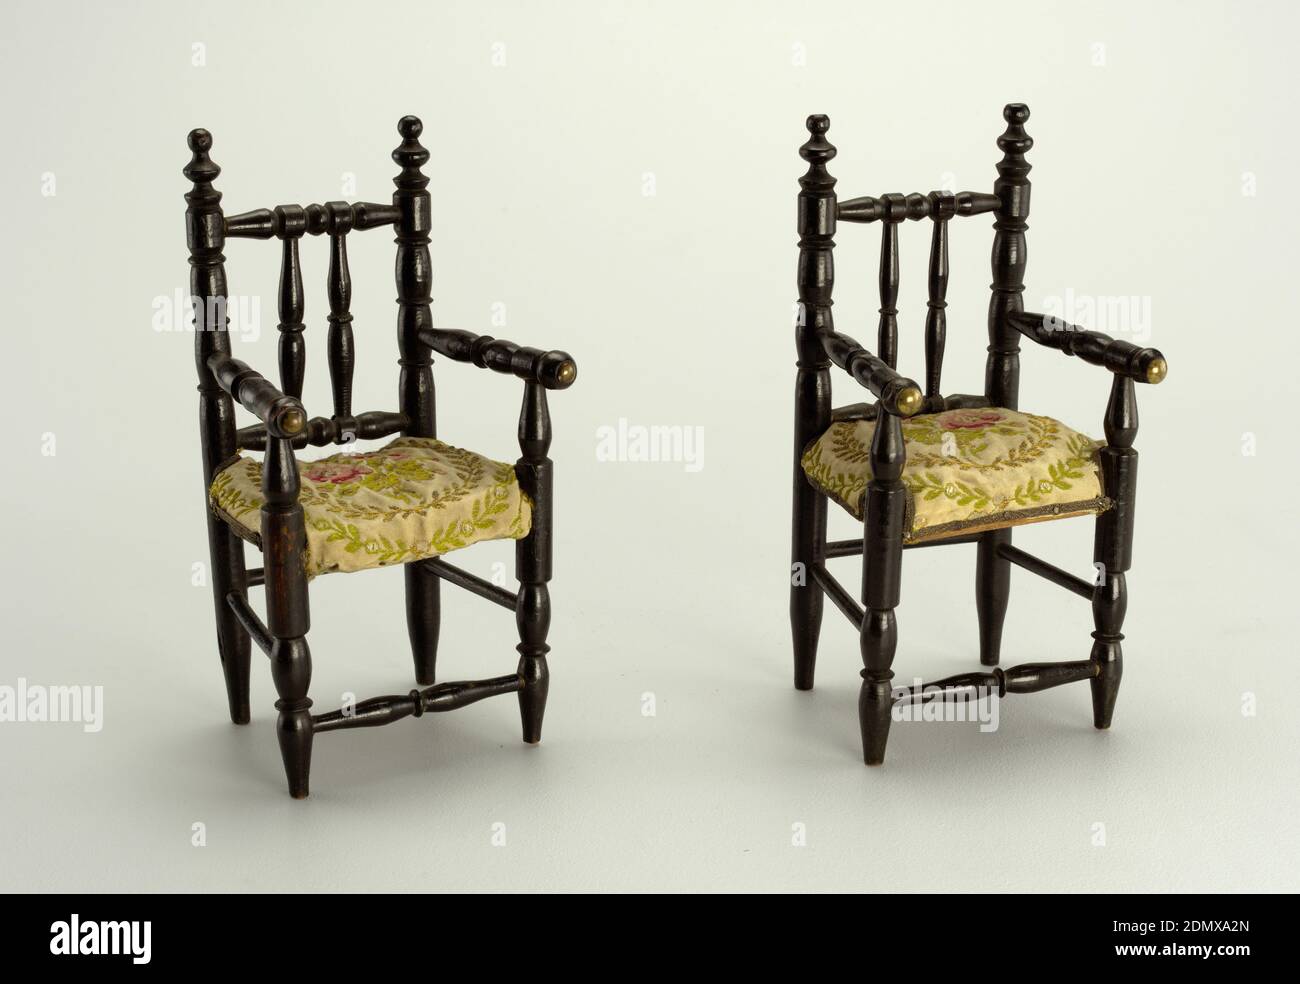 chair, wood, turned and joined, In 17th century style, England or USA, mid-19th century, miniatures, Decorative Arts, Miniature, Miniature Stock Photo